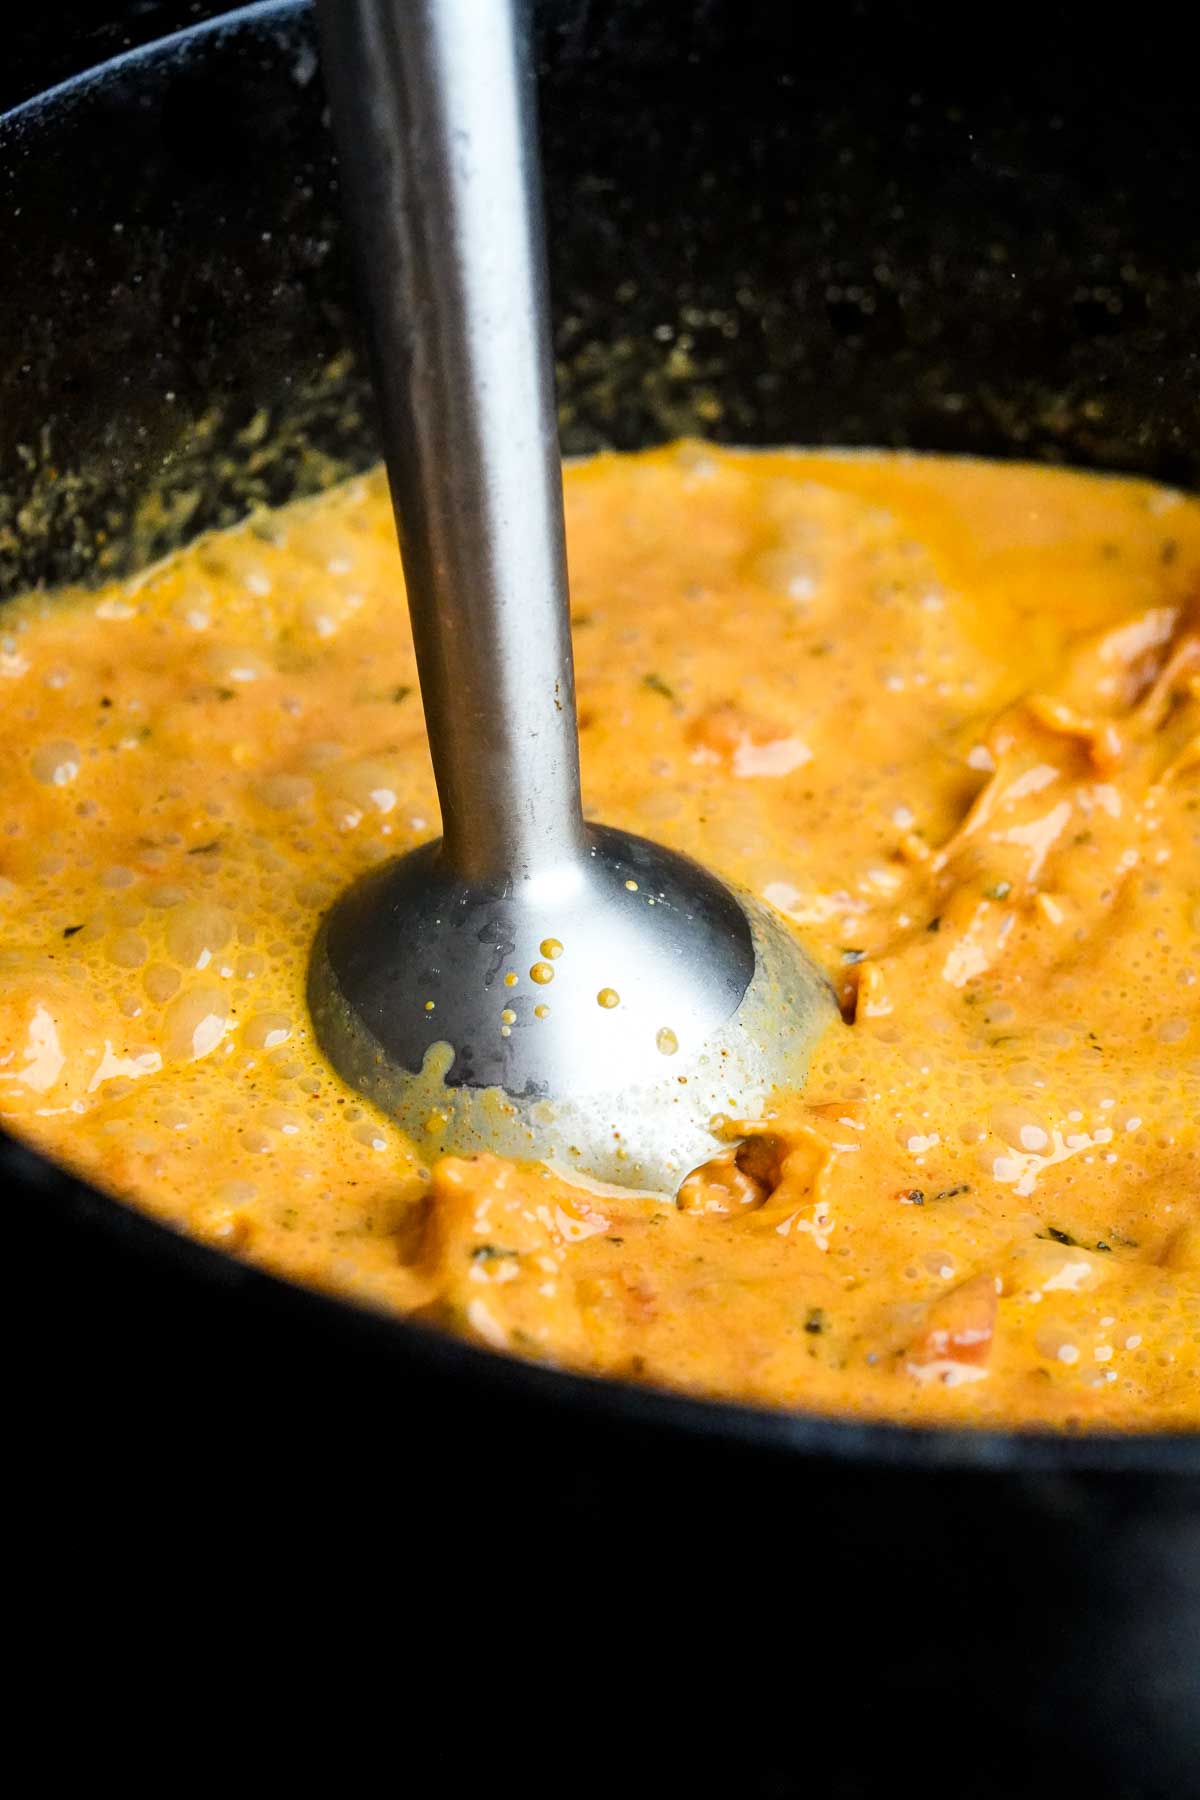 An immersion blender is being used to puree a sauce in a pan.